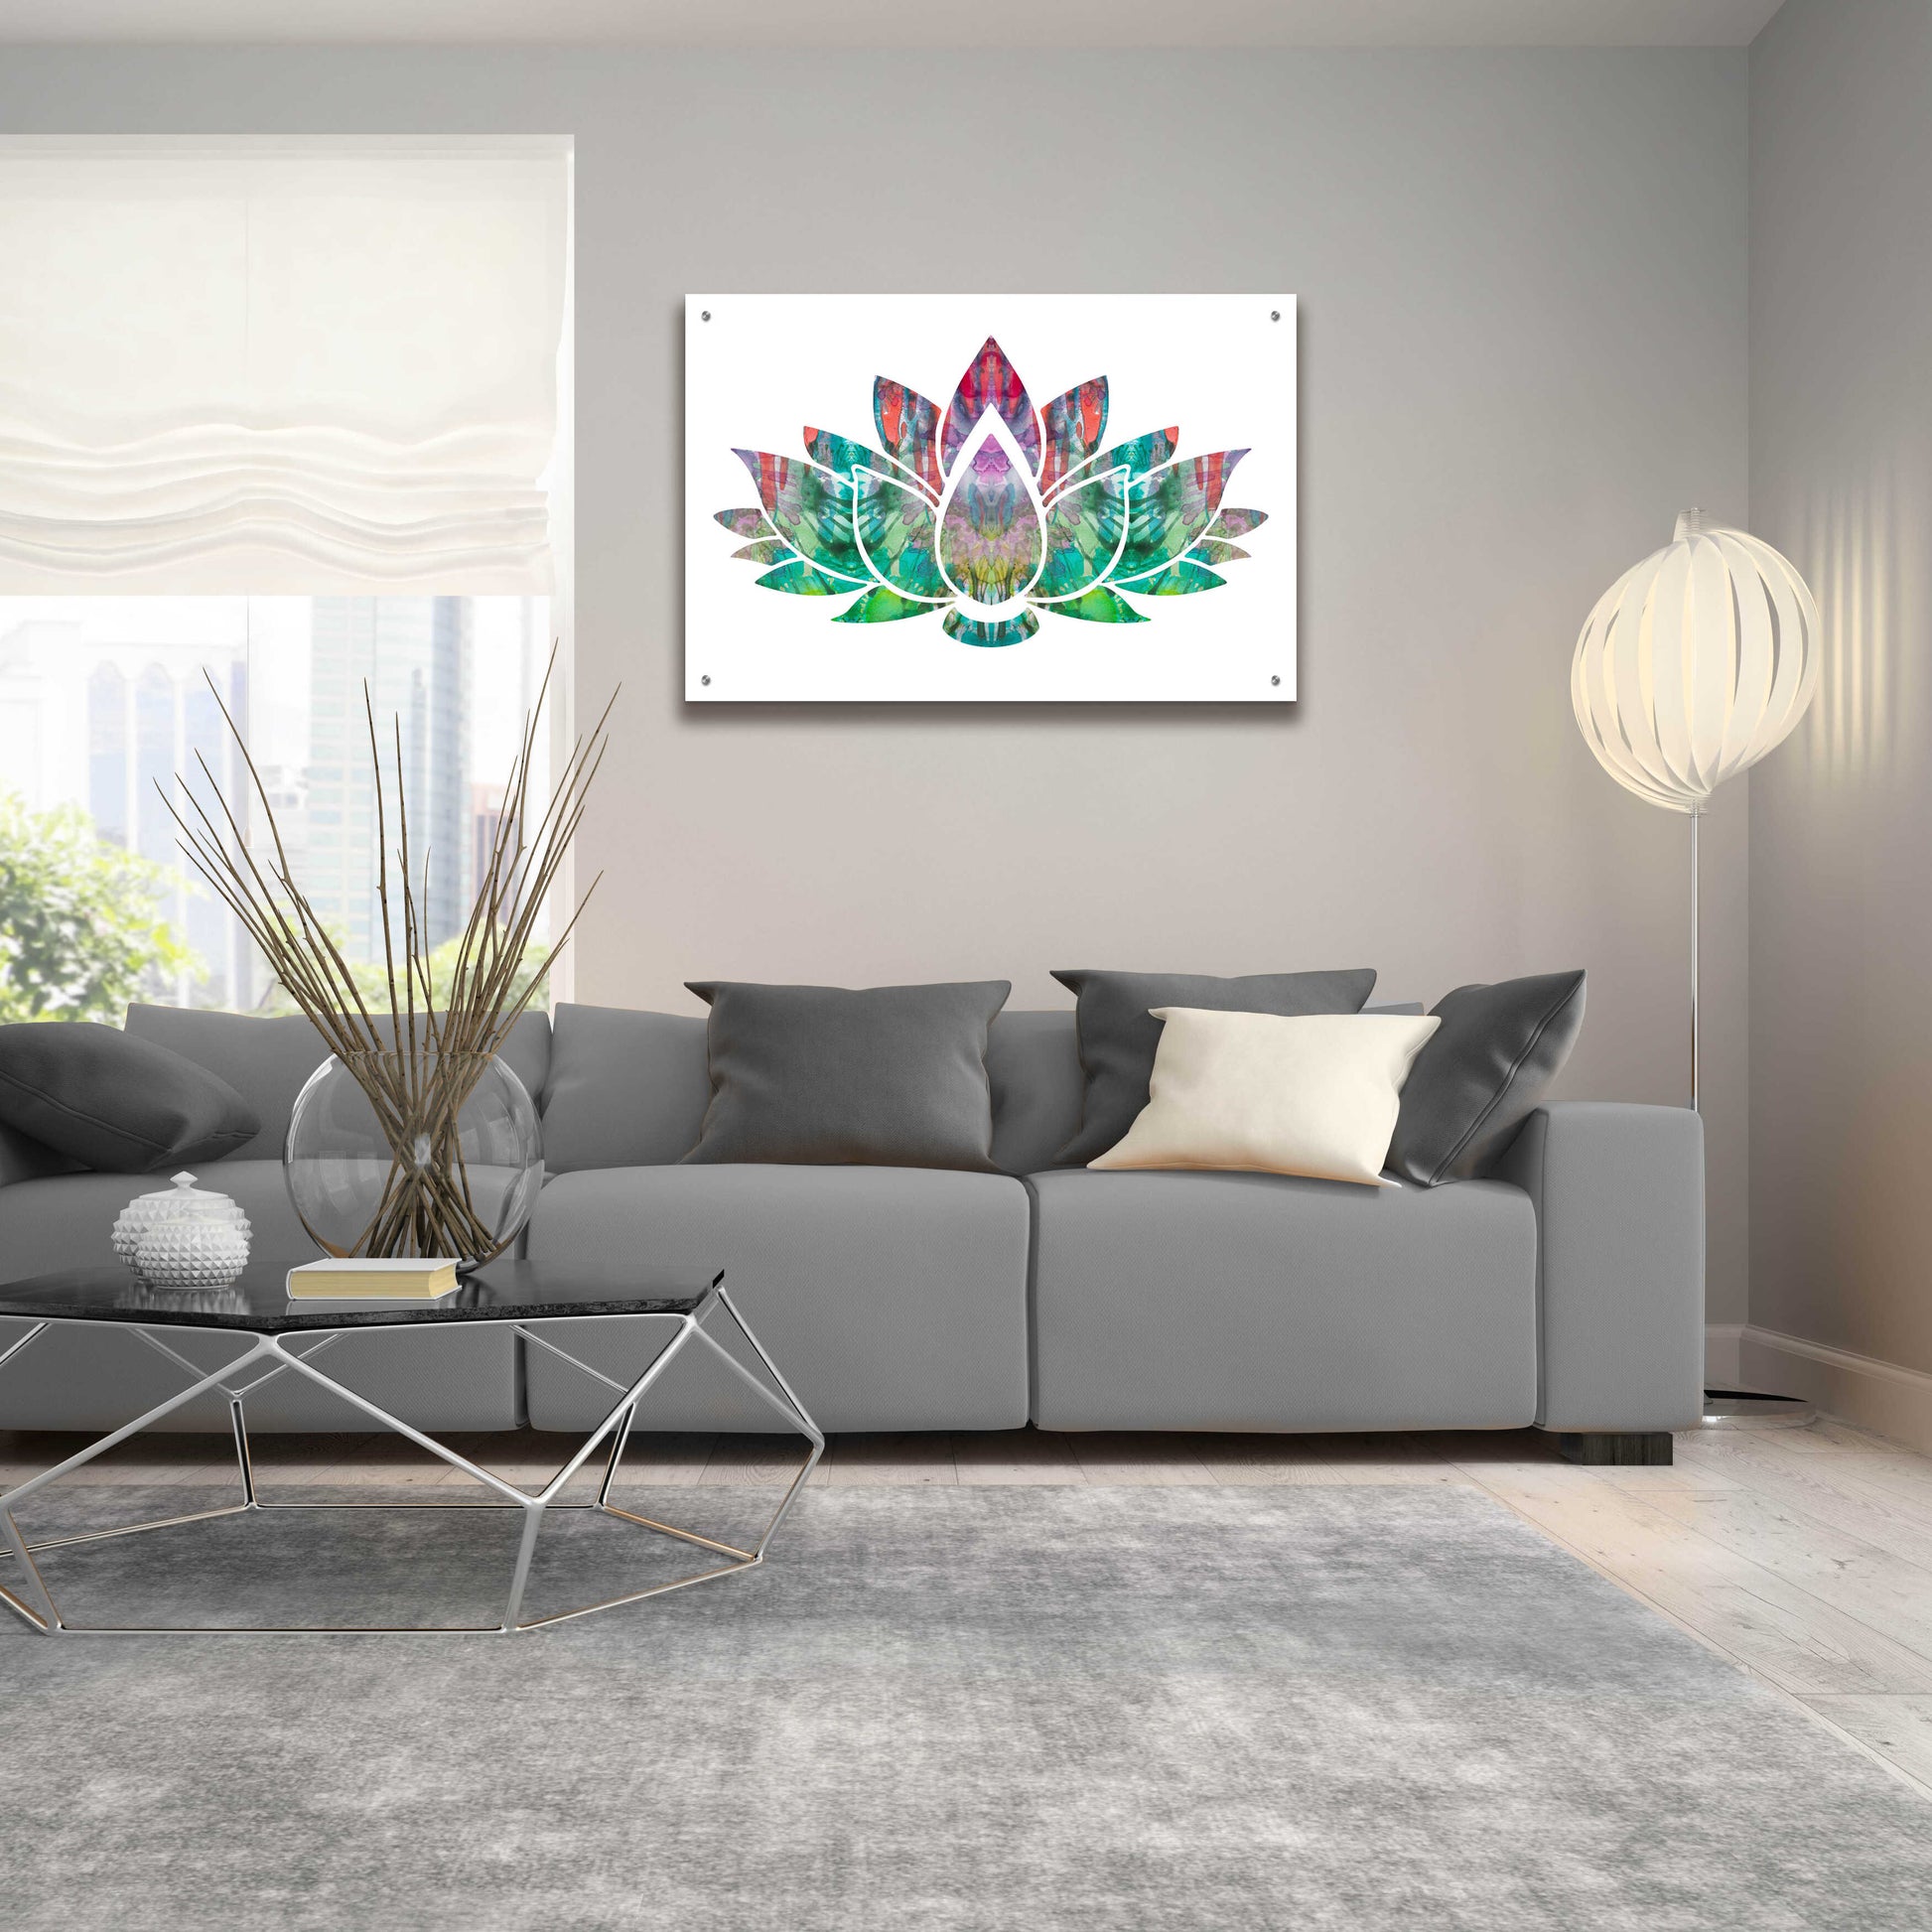 Epic Art 'Lotus' by Dean Russo, Acrylic Glass Wall Art,36x24